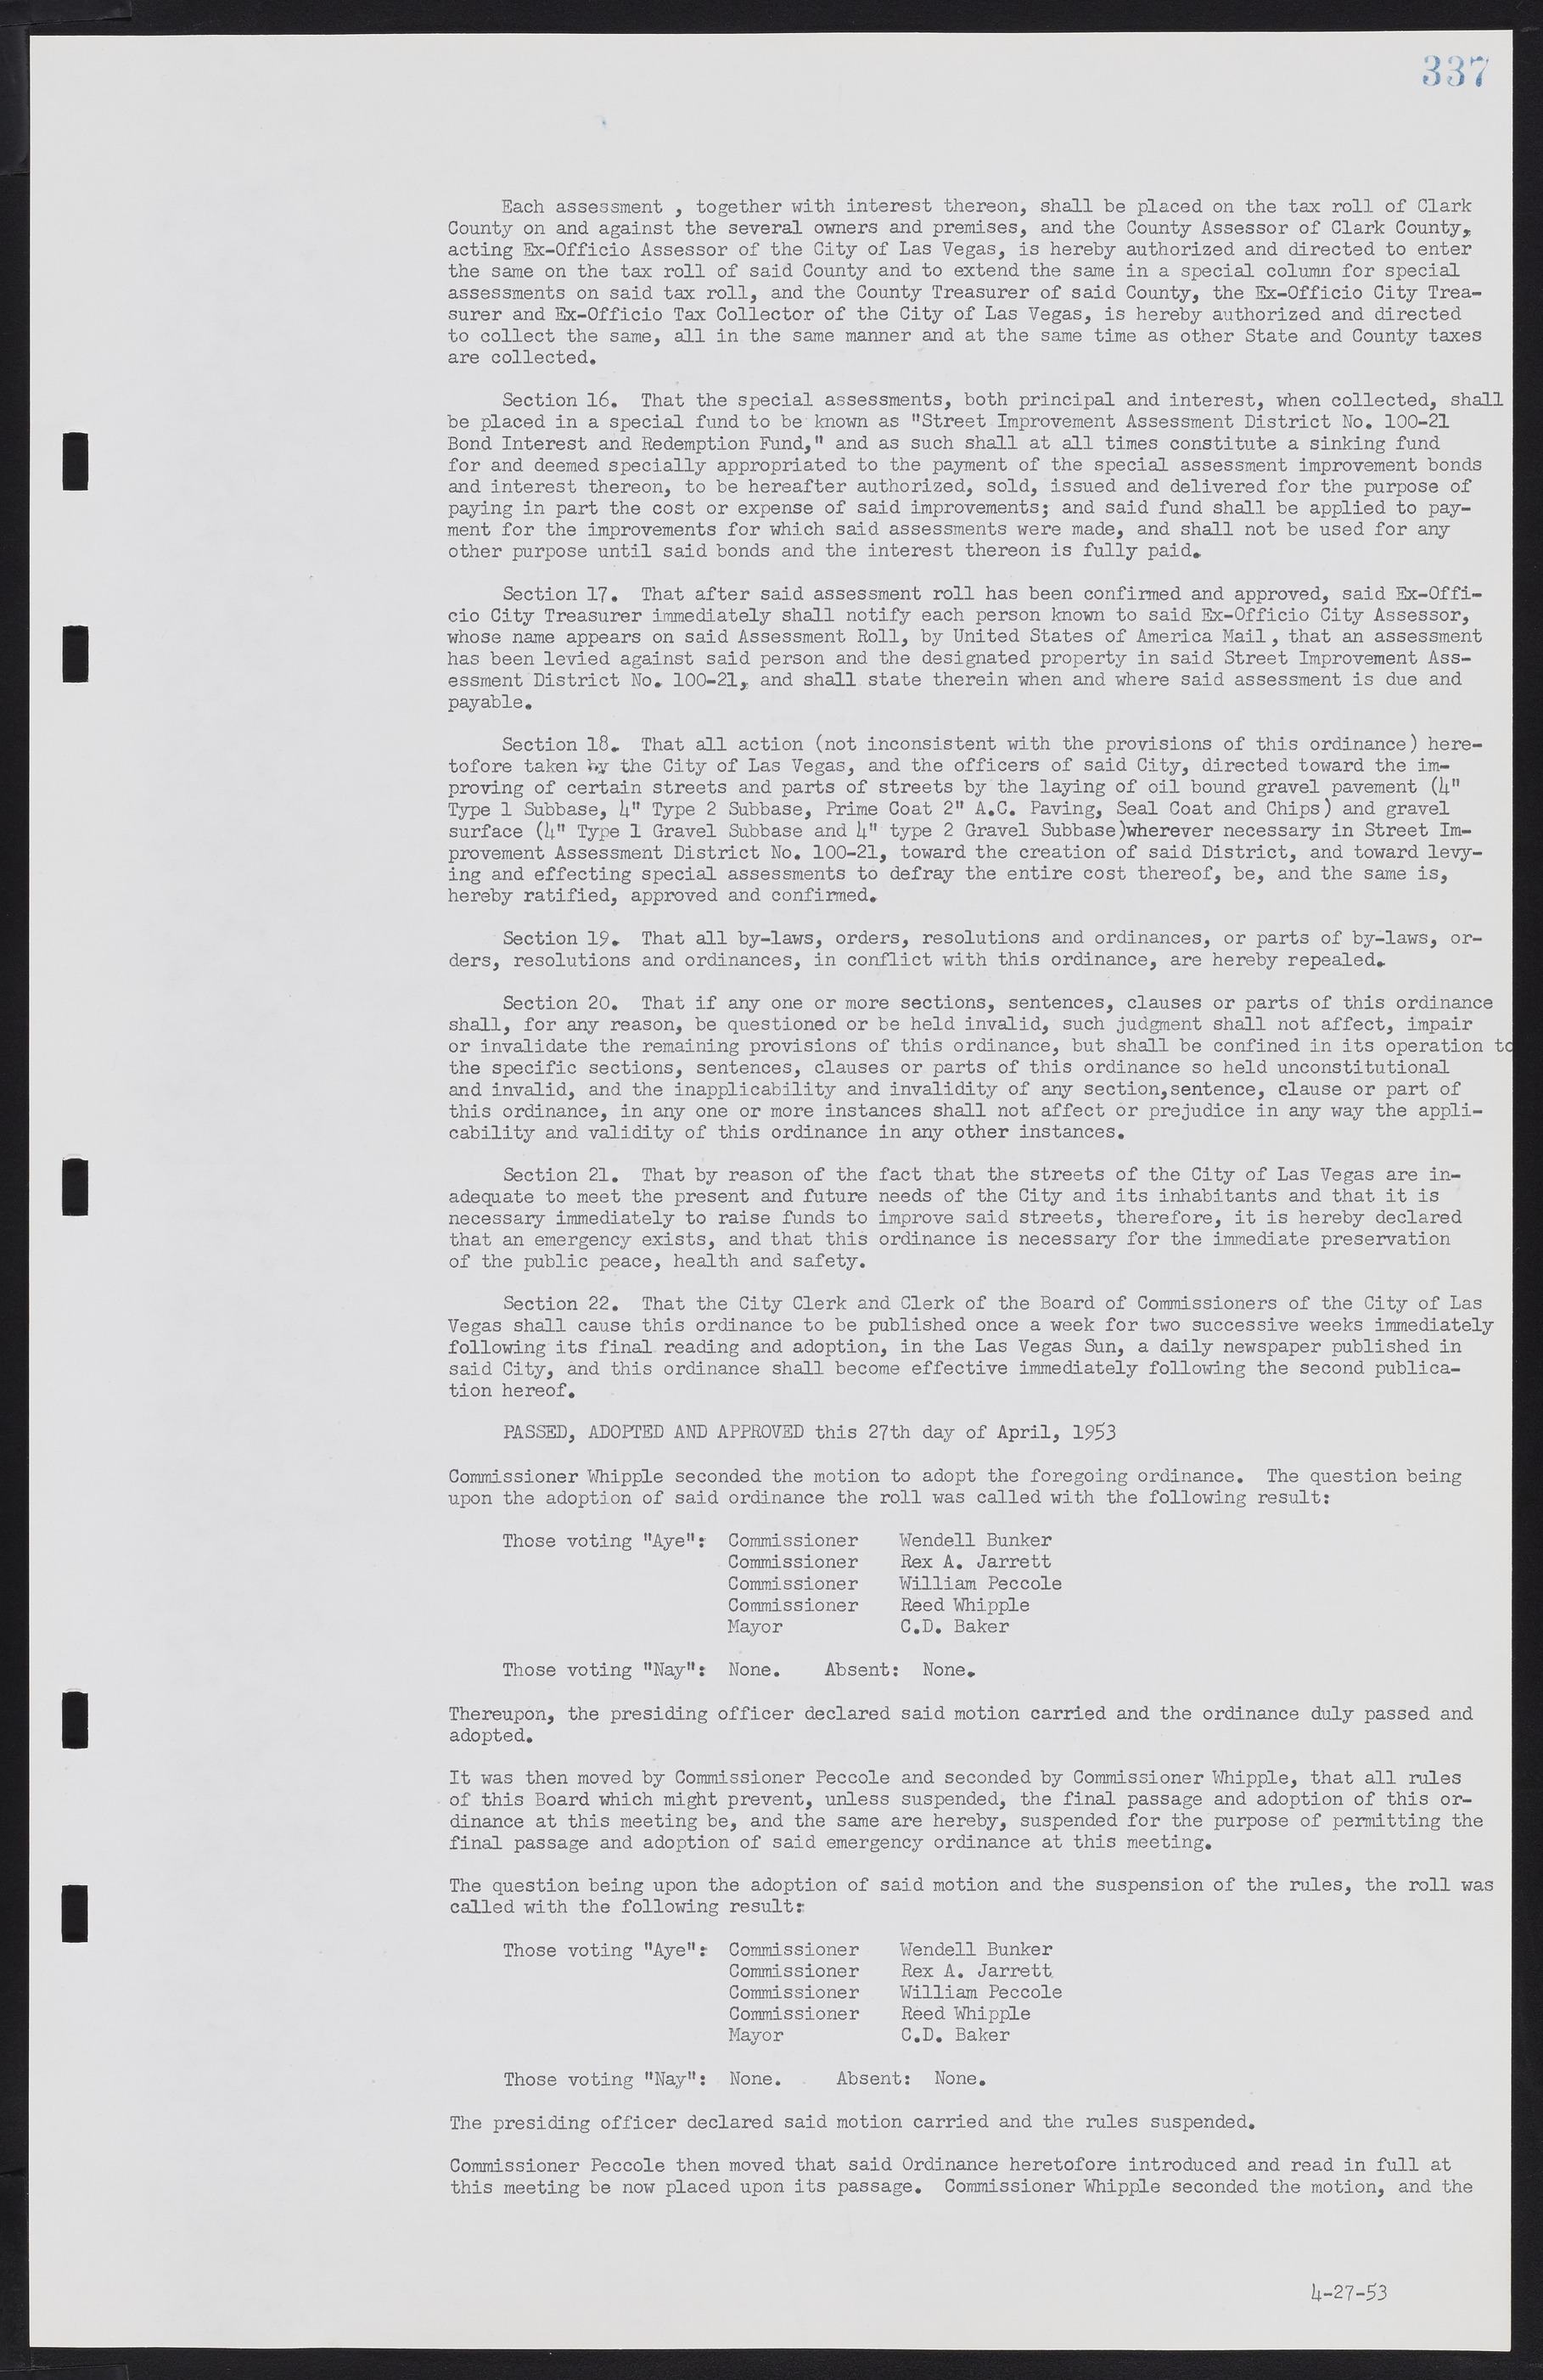 Las Vegas City Commission Minutes, May 26, 1952 to February 17, 1954, lvc000008-365